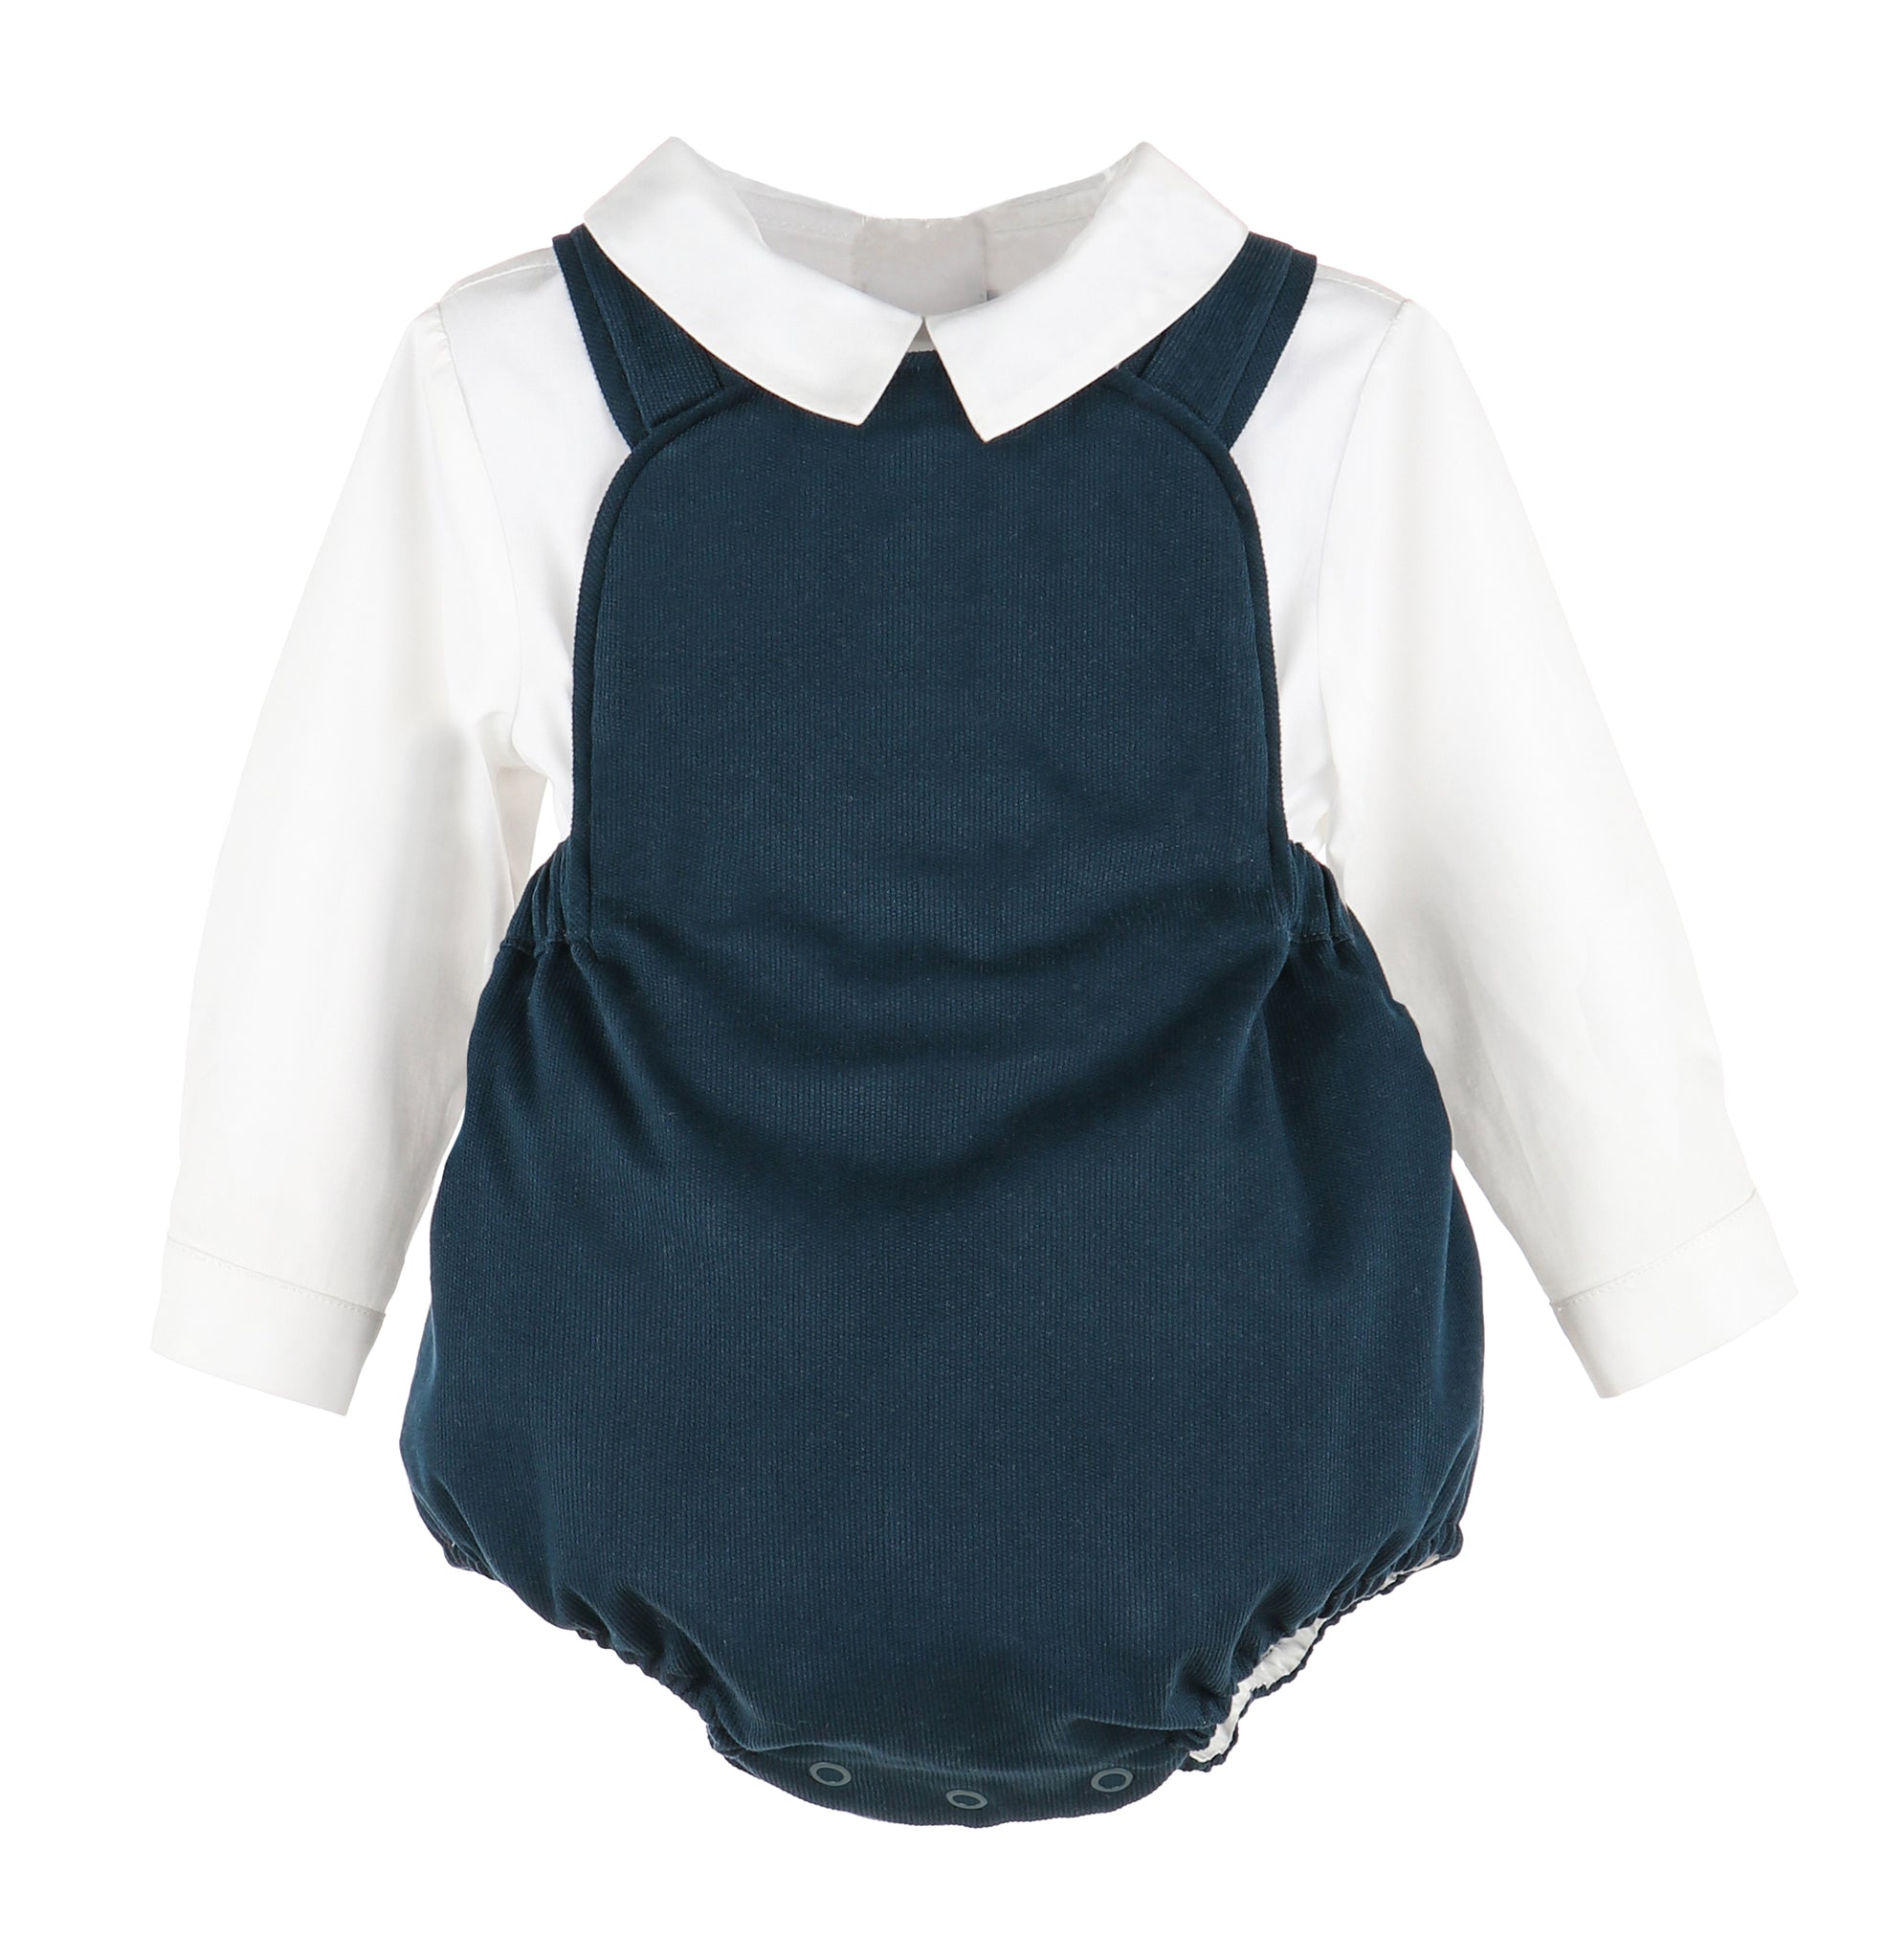 THE CLASSIC'S VINTAGE BOY OVERALL, NAVY - SL3334